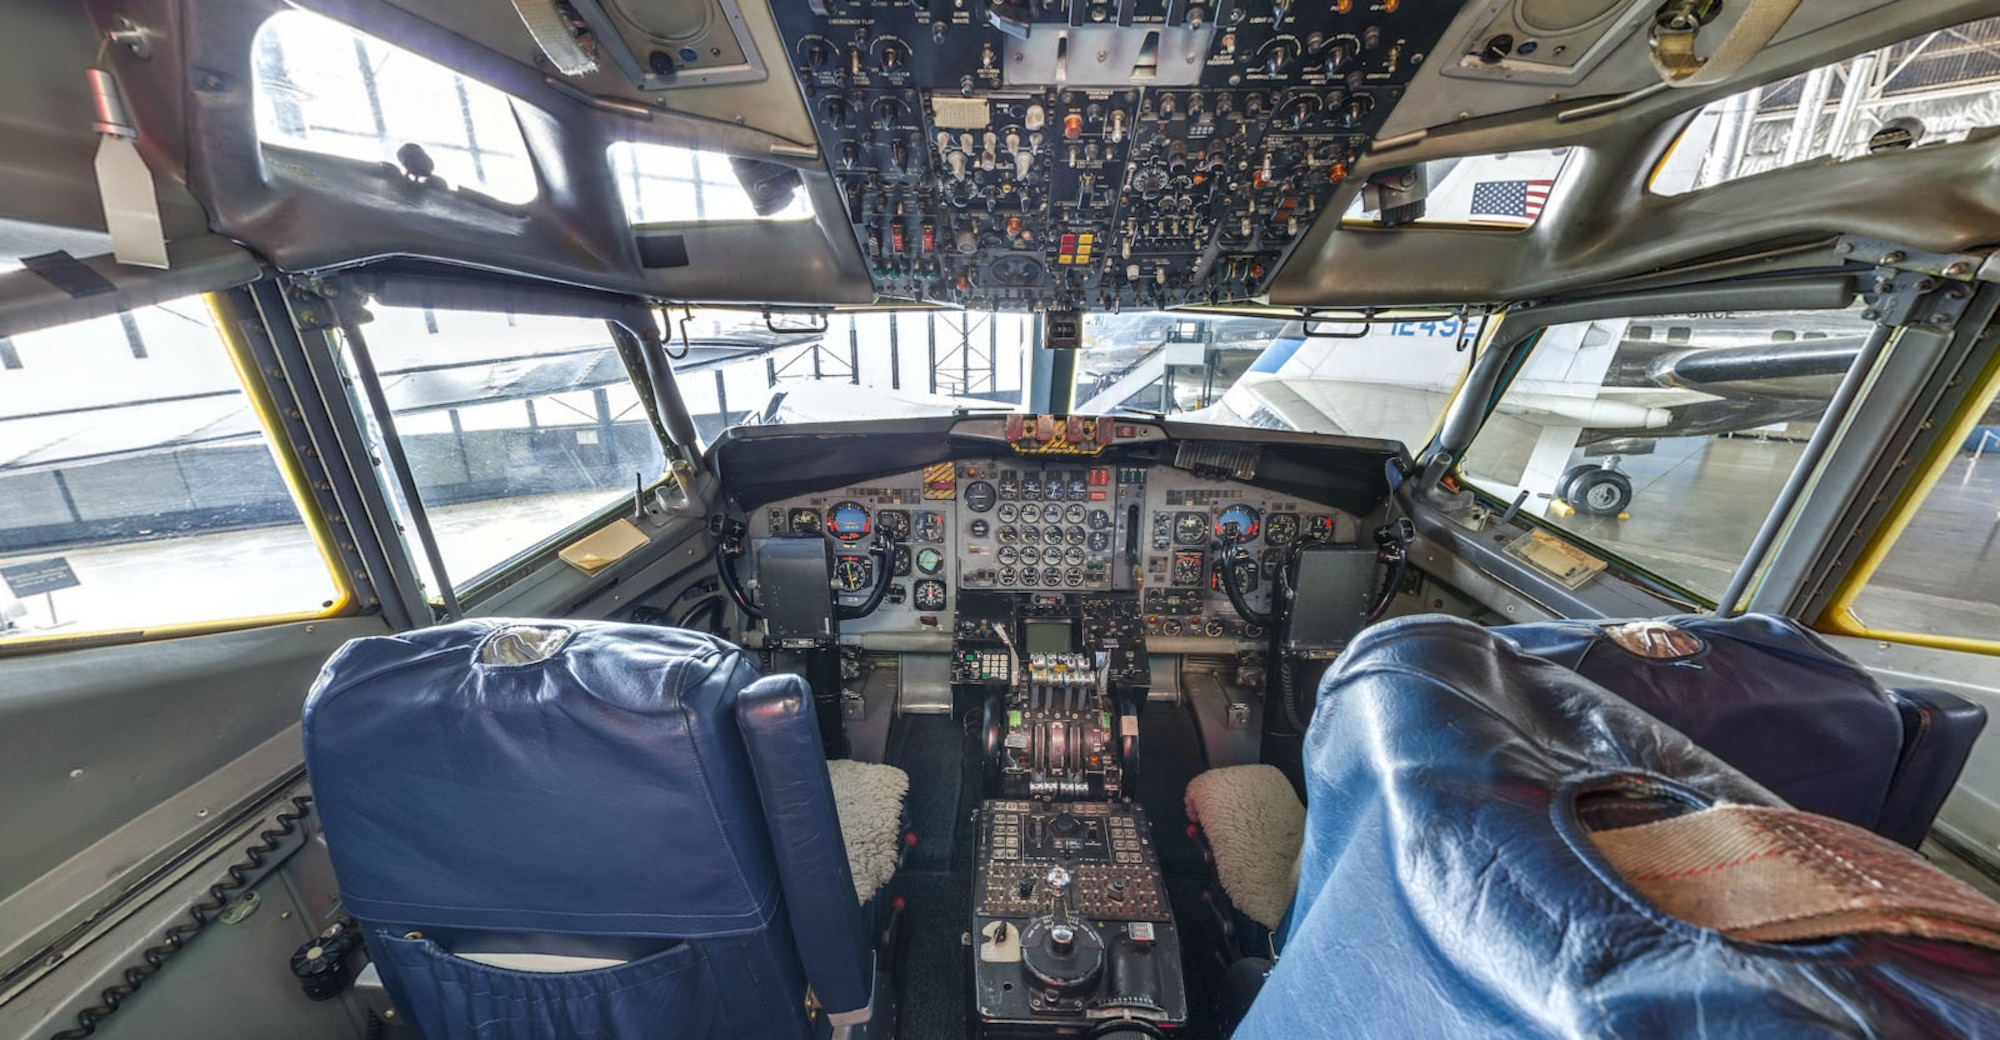 DAYTON, Ohio -- Flight deck view of Boeing VC-137C SAM 26000 (Air Force One) at the National Museum of the U.S. Air Force. This photo is part of the free ACI Cockpit360º app, which features high-definition panoramic photos of more than 20 cockpits from many well-known aircraft on display at the National Museum of the U.S. Air Force. (Photo courtesy of Lyle Jansma, Aerocapture Images)